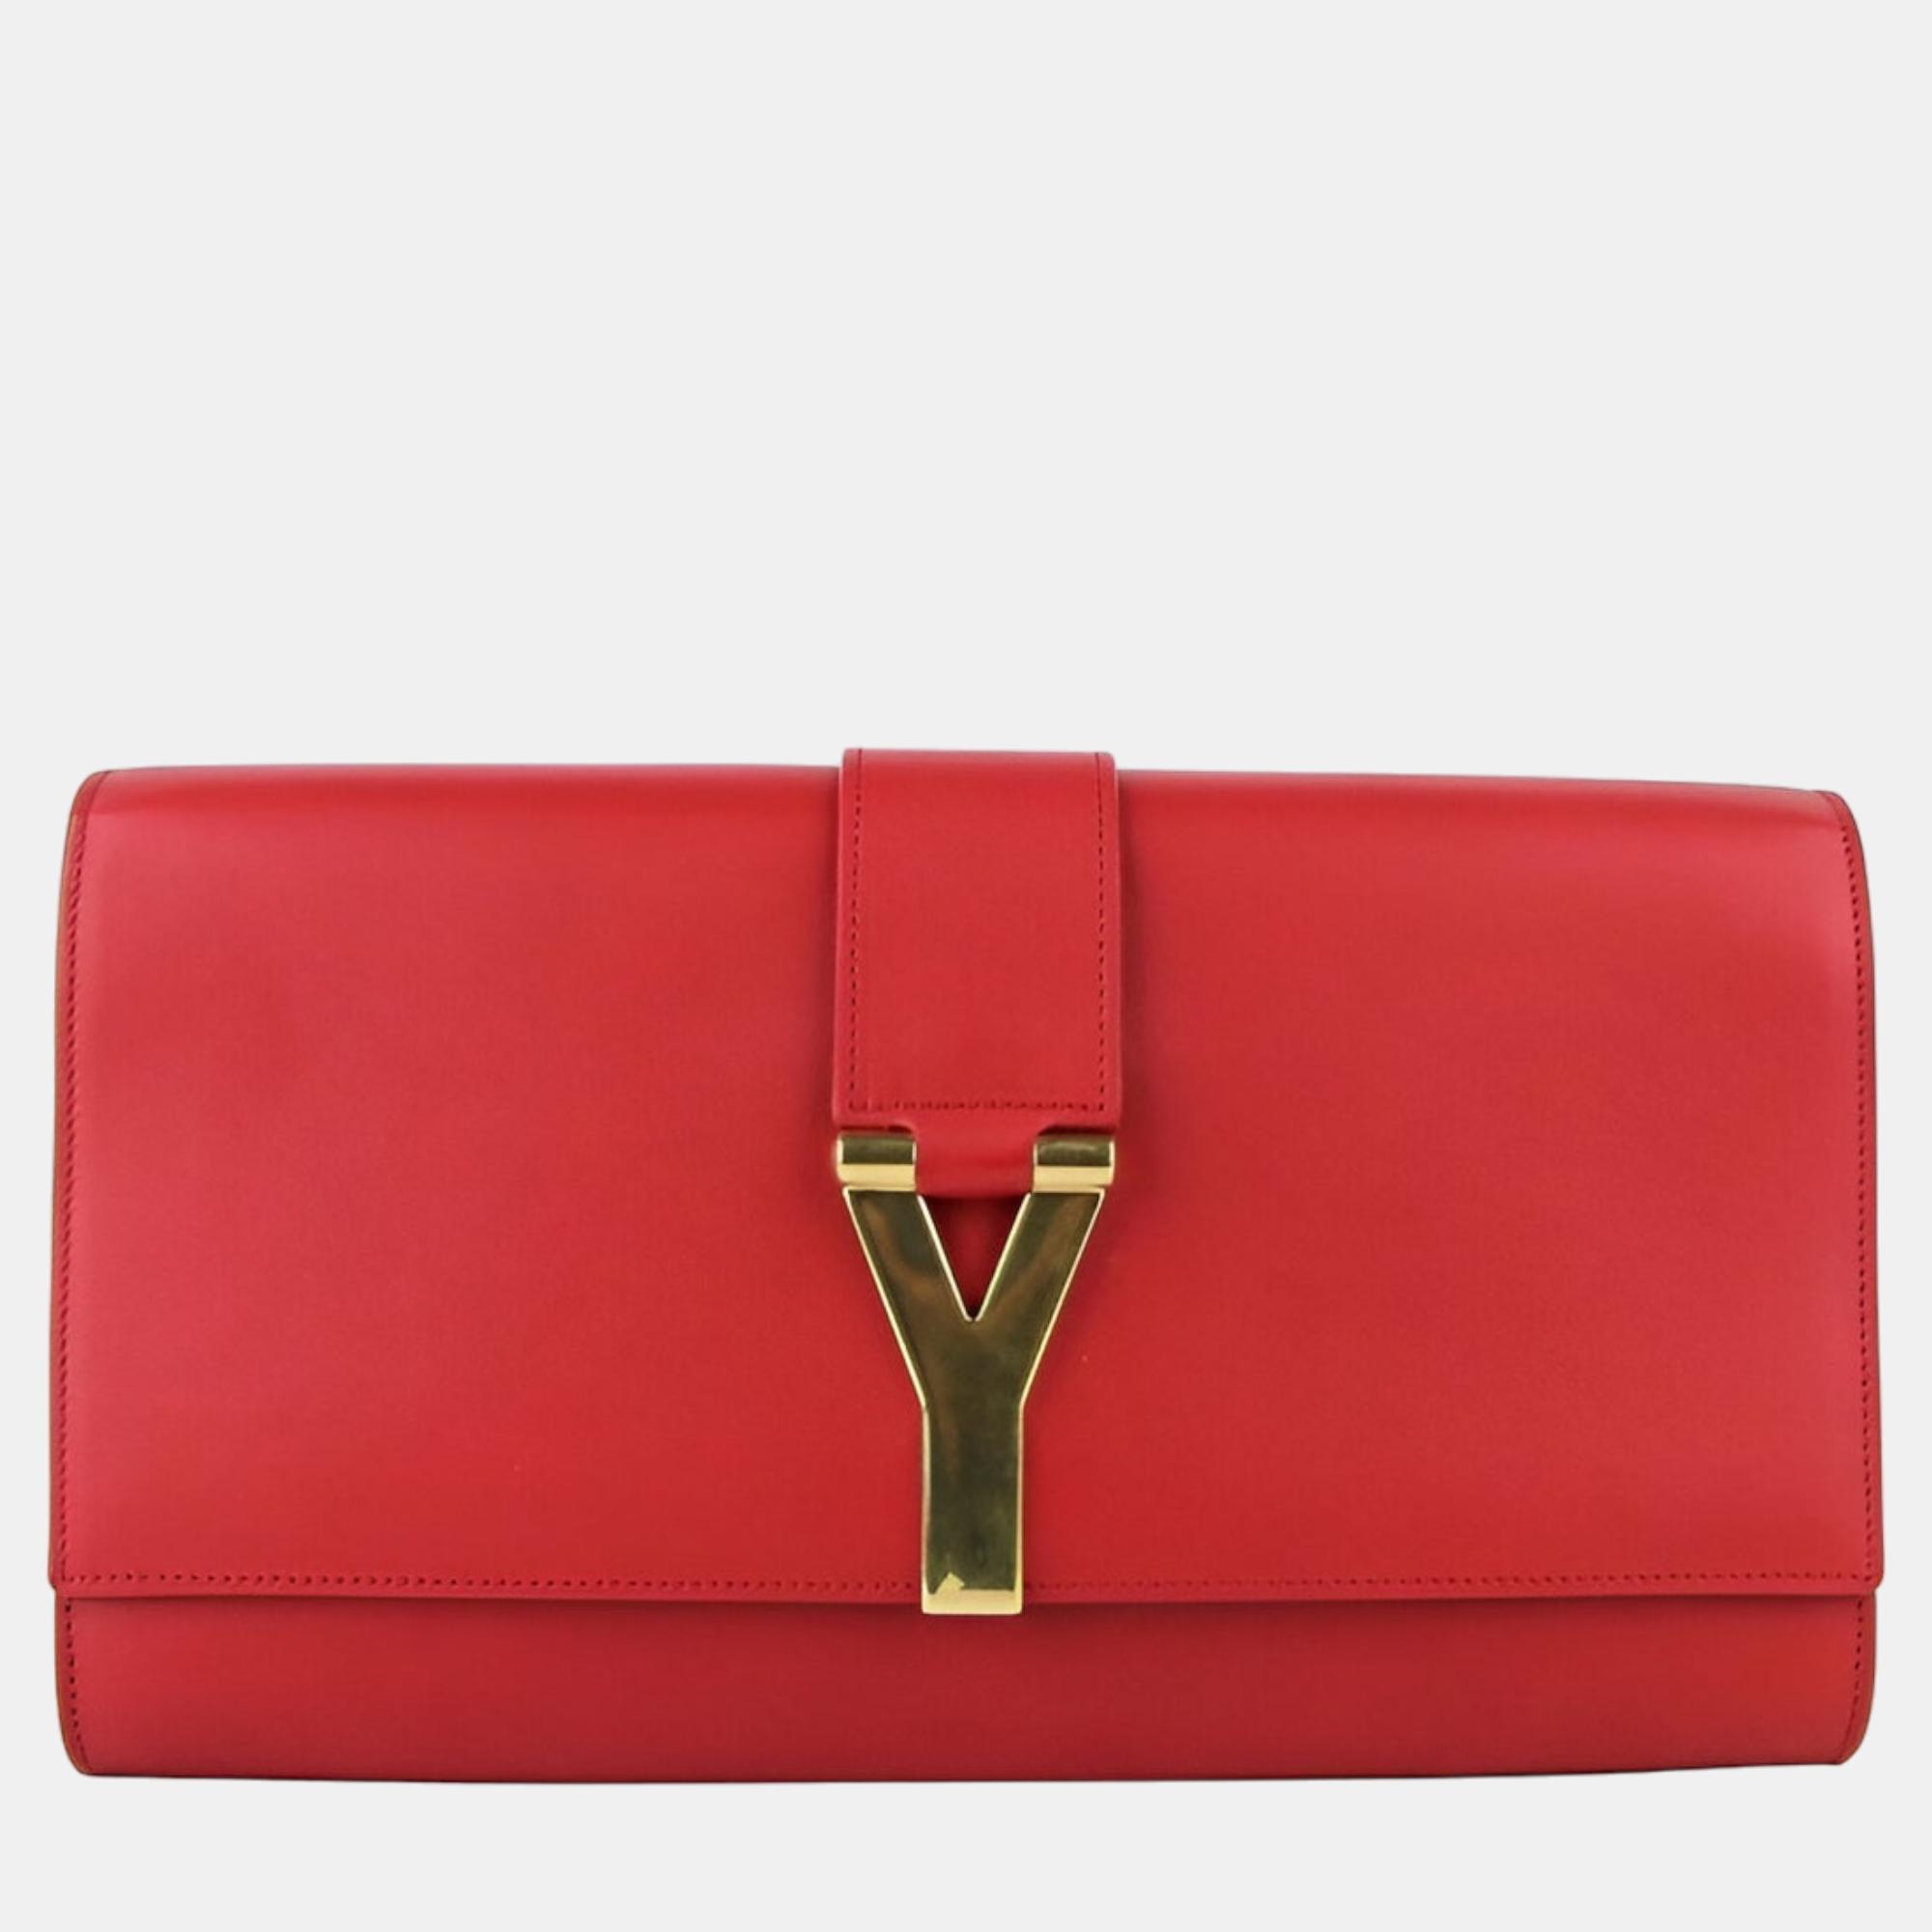 Pre-owned Saint Laurent Red Leather Clutch